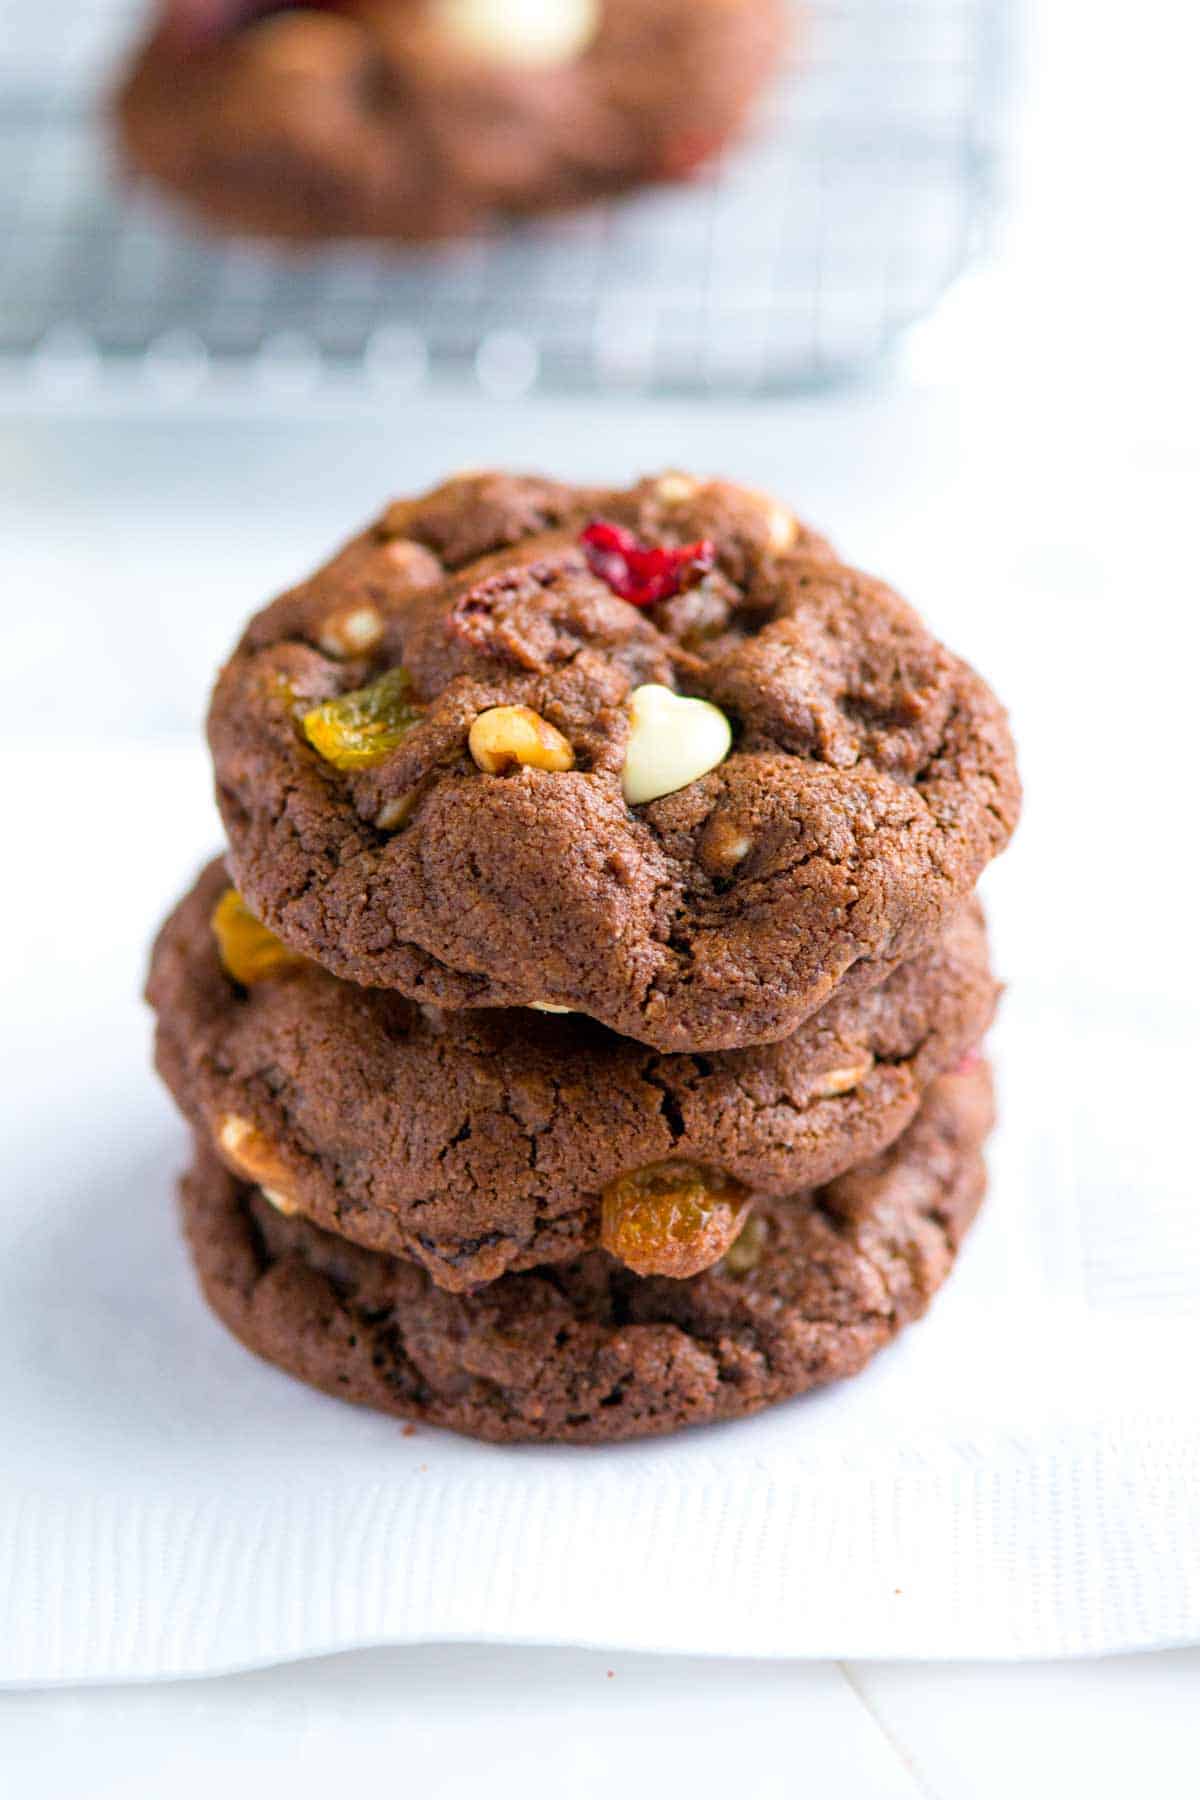 Chocolate Nut Cookies Recipe: How to Make It